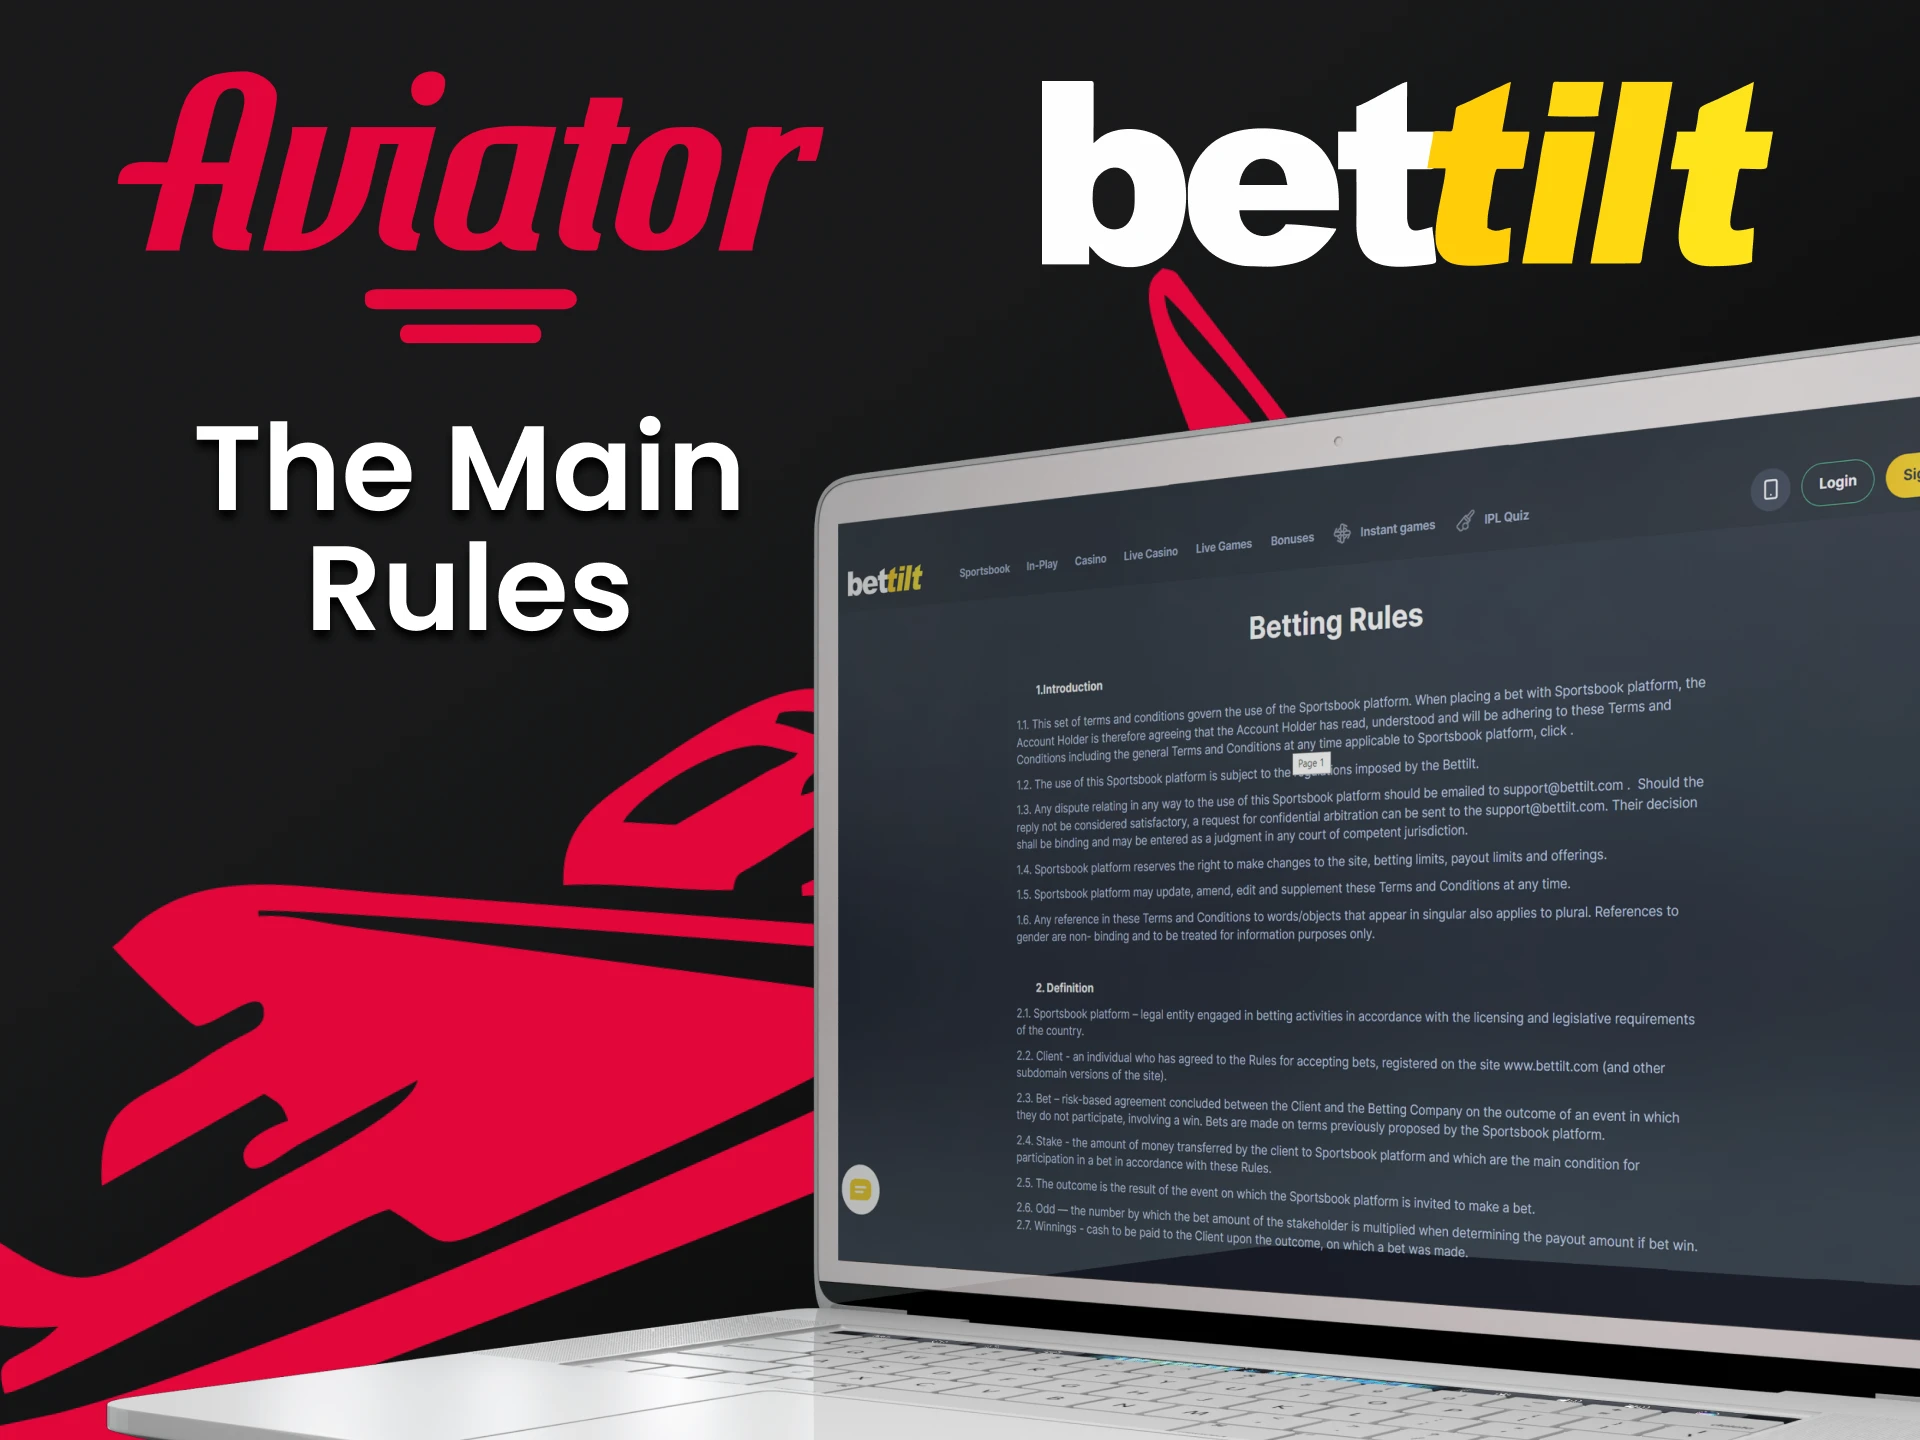 Learn the rules for using the Bettilt service.